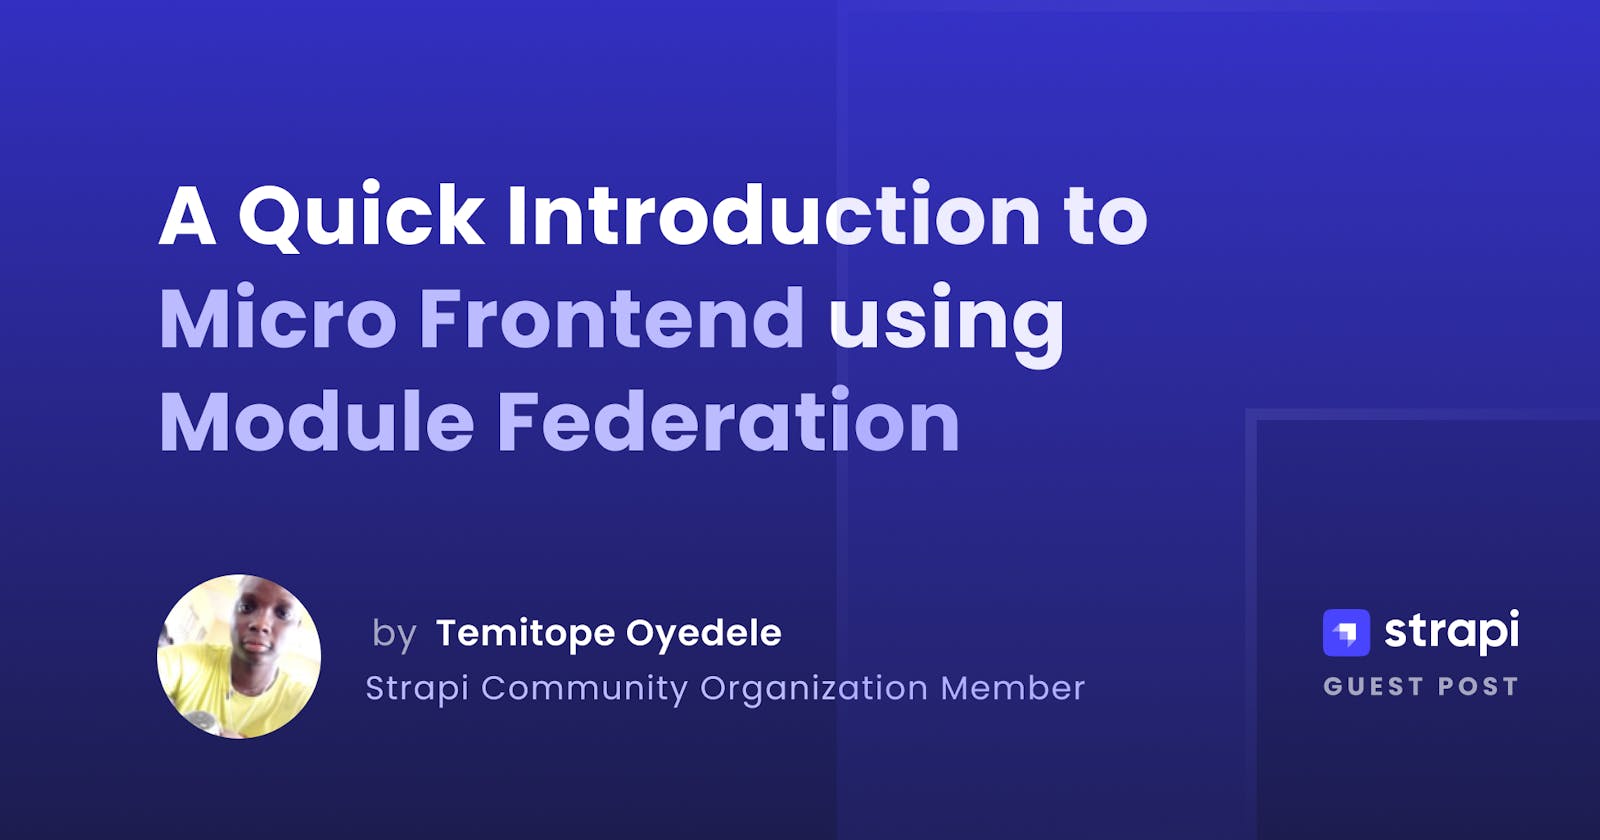 A Quick Introduction to Micro Frontend using Module Federation